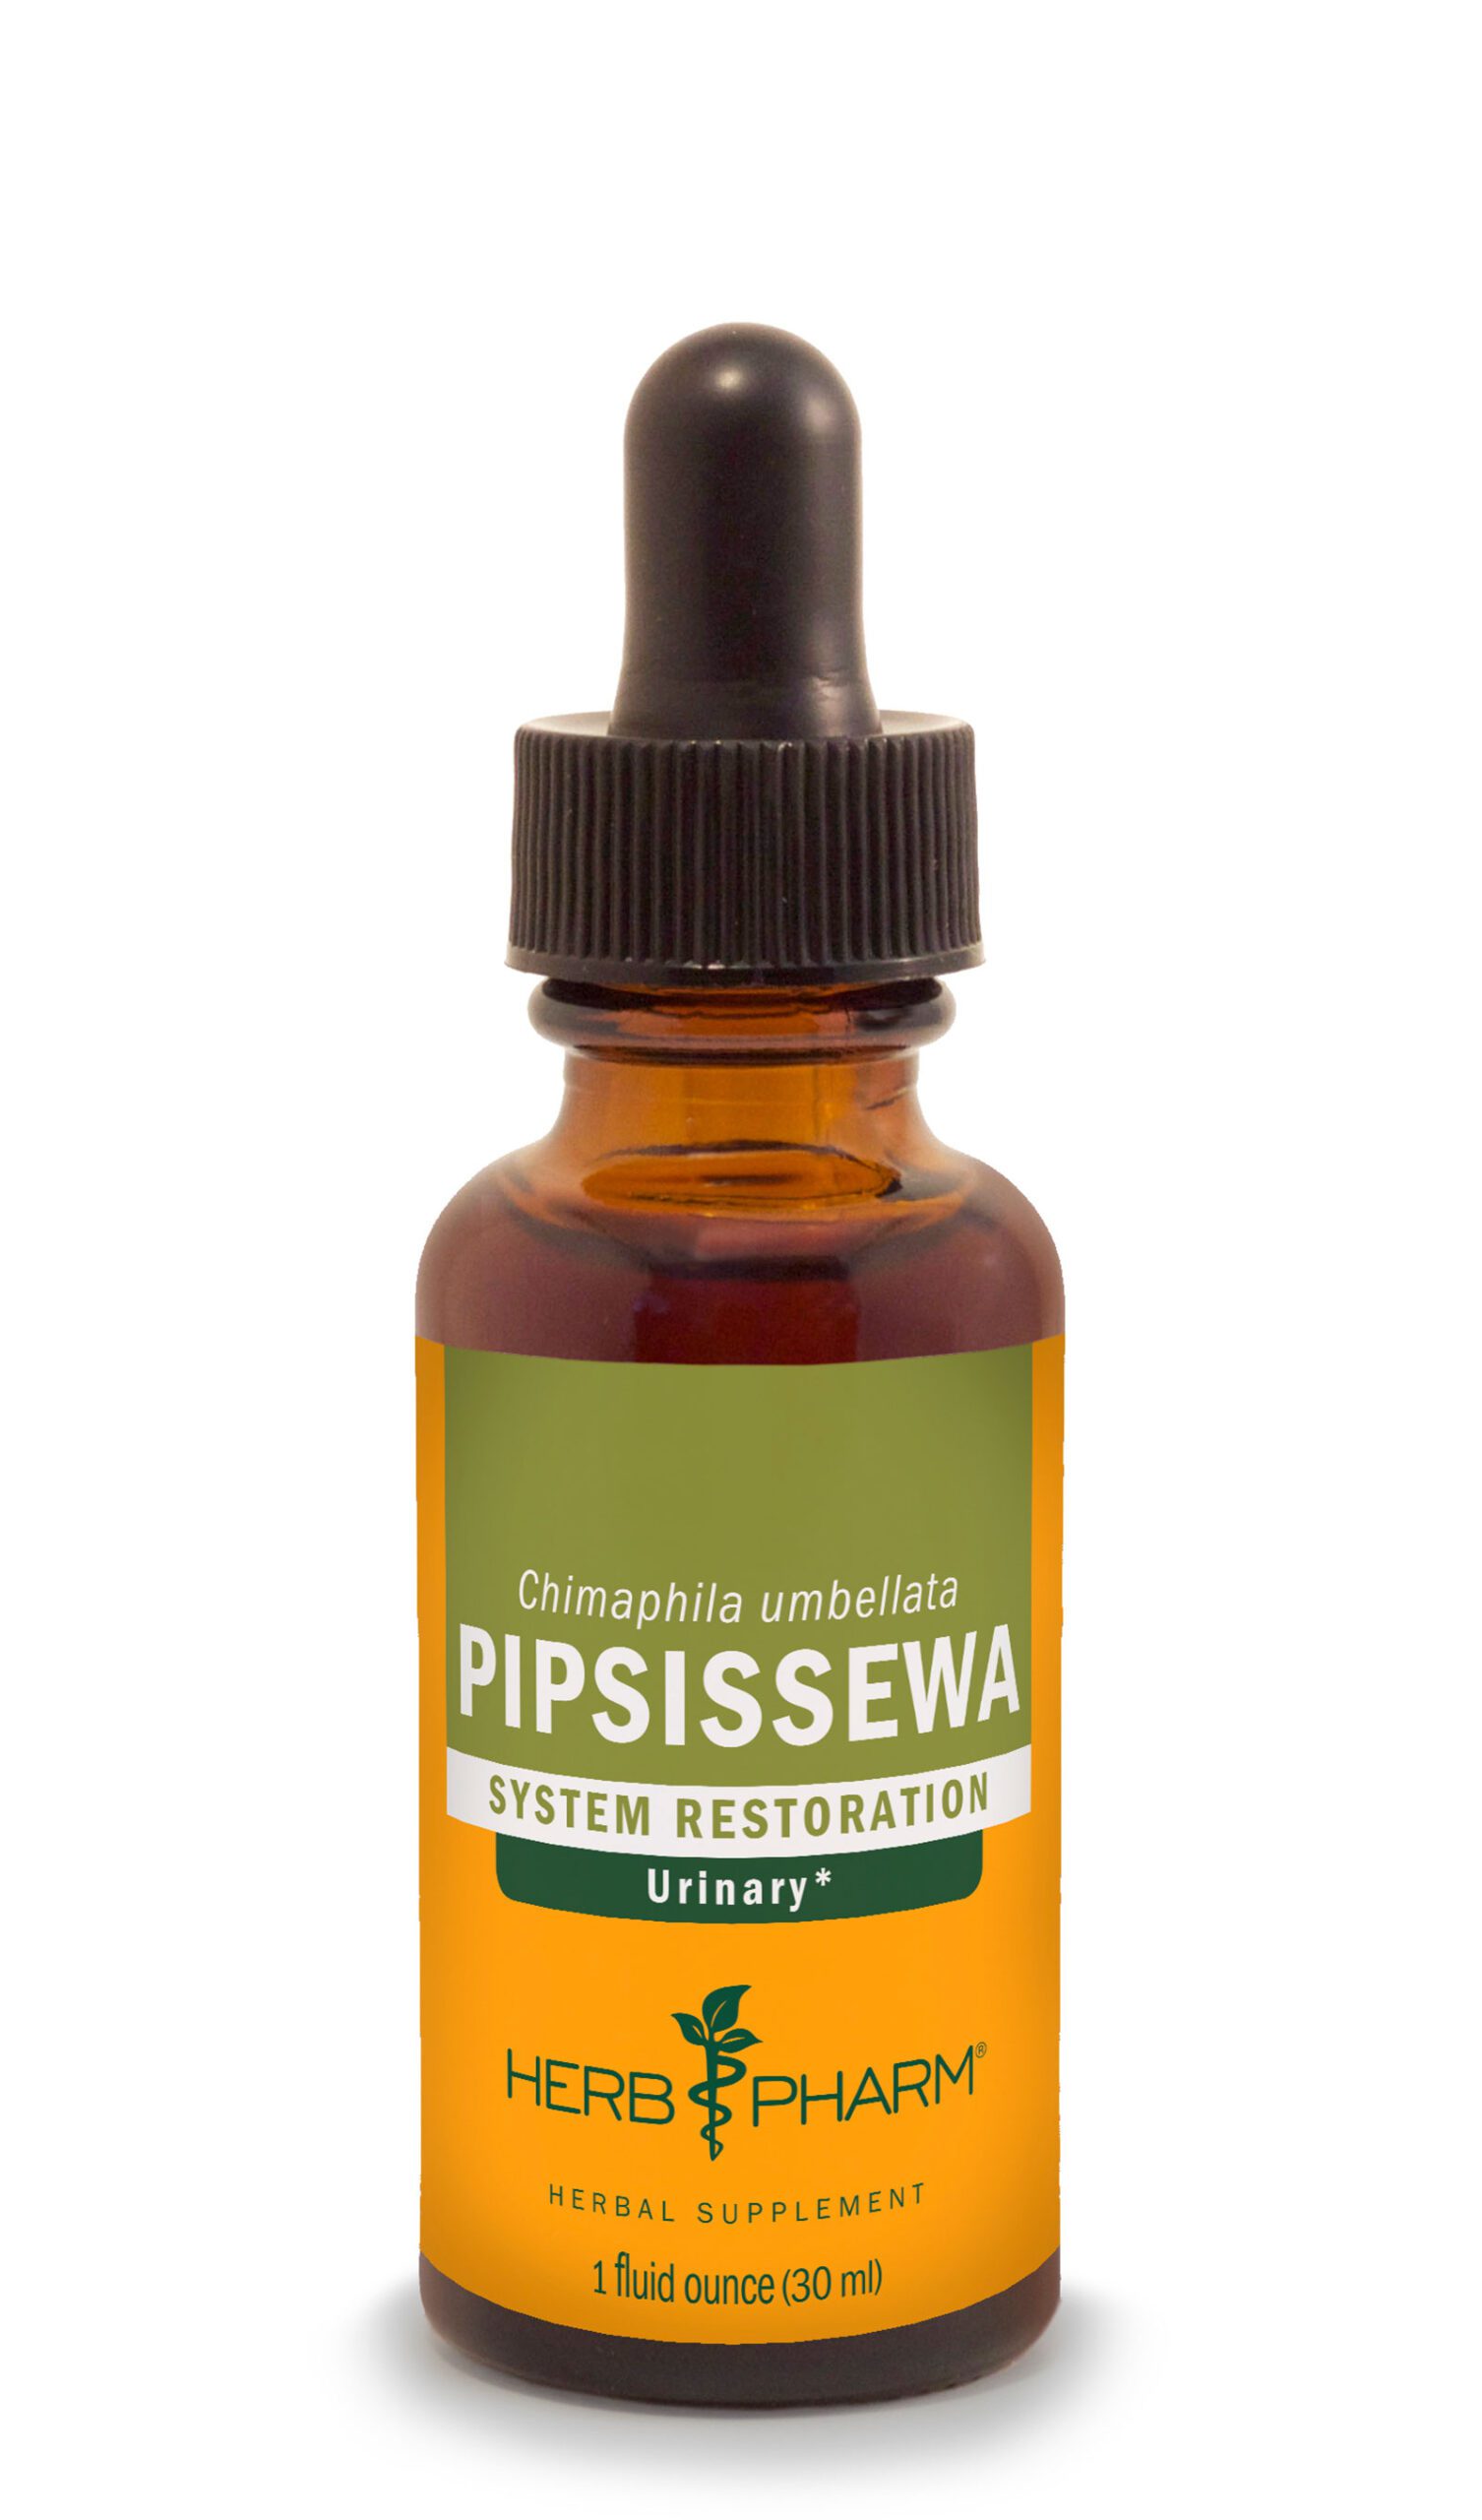 Product Listing Image for Herb Pharm Pipsissewa Tincture 1oz